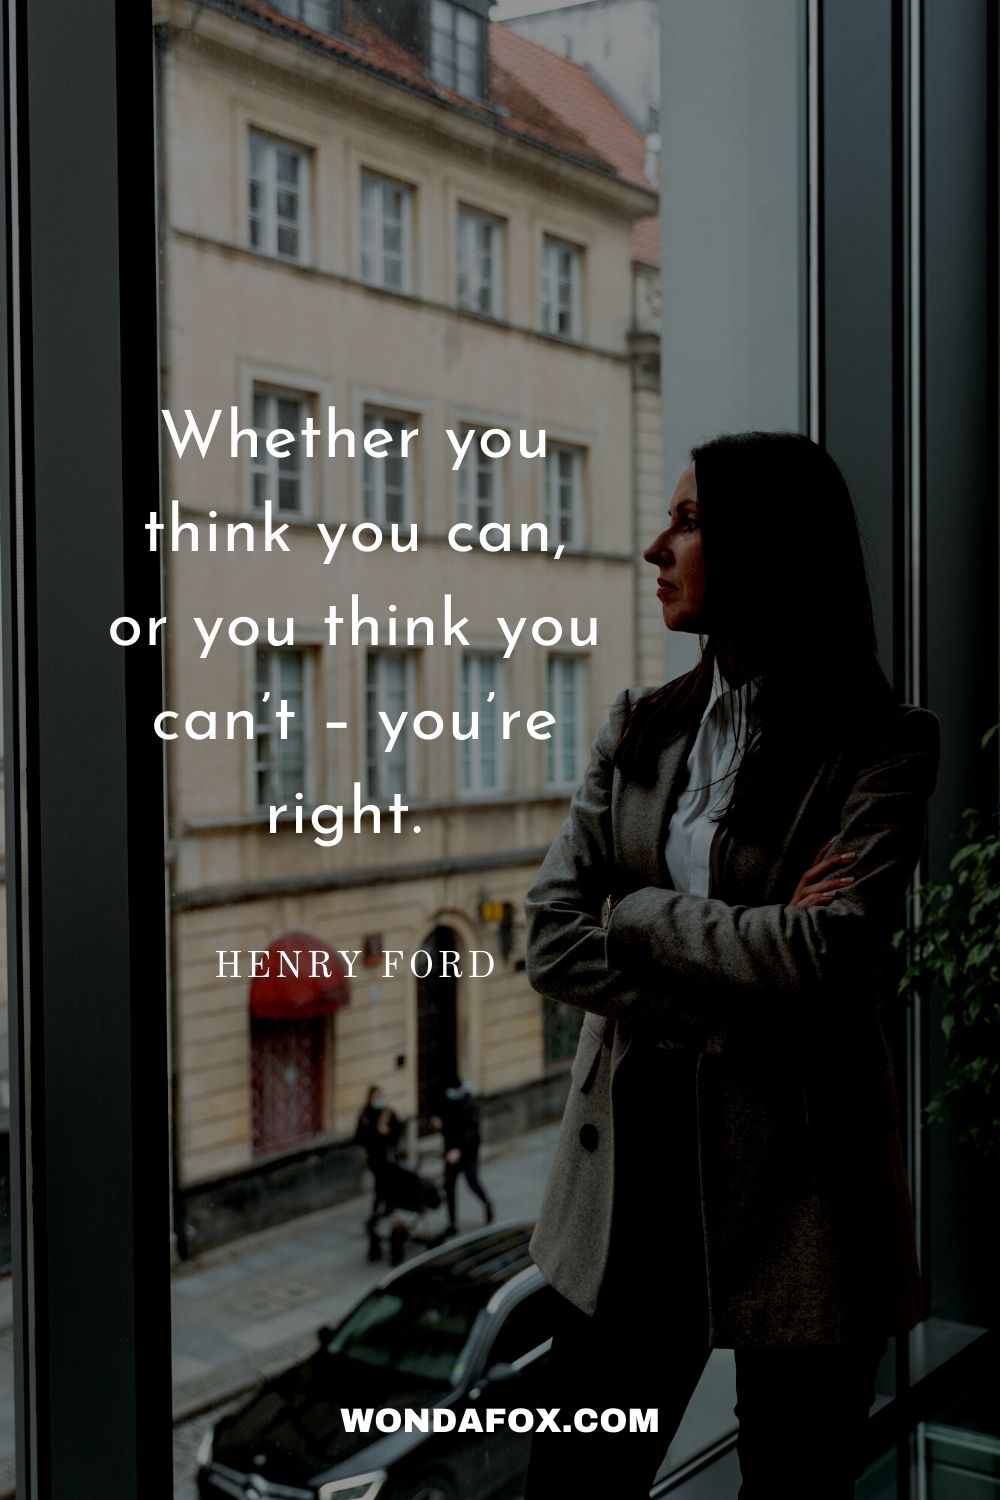 Whether you think you can, or you think you can’t – you’re right. work quotes